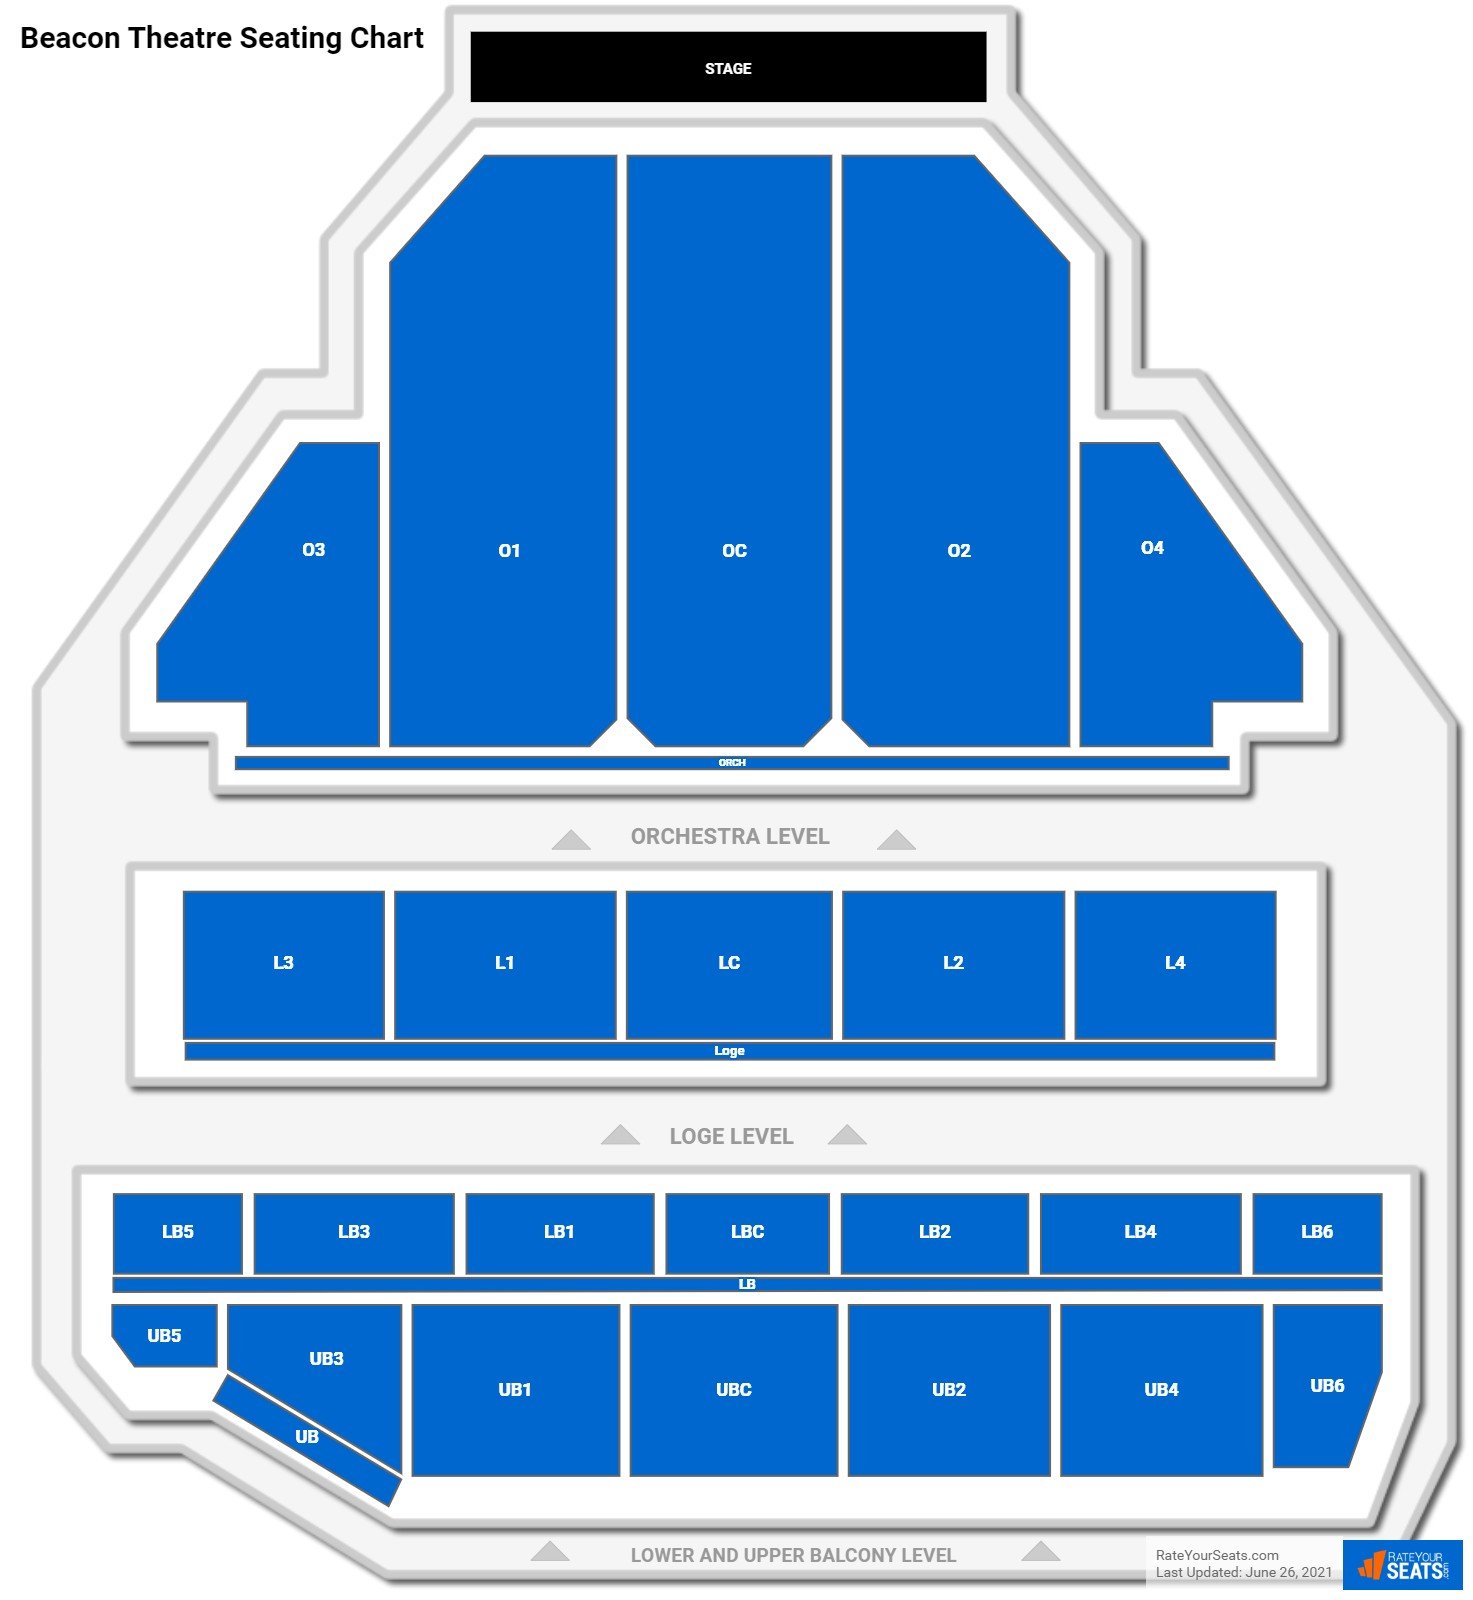 Beacon Theatre Concert Seating Chart